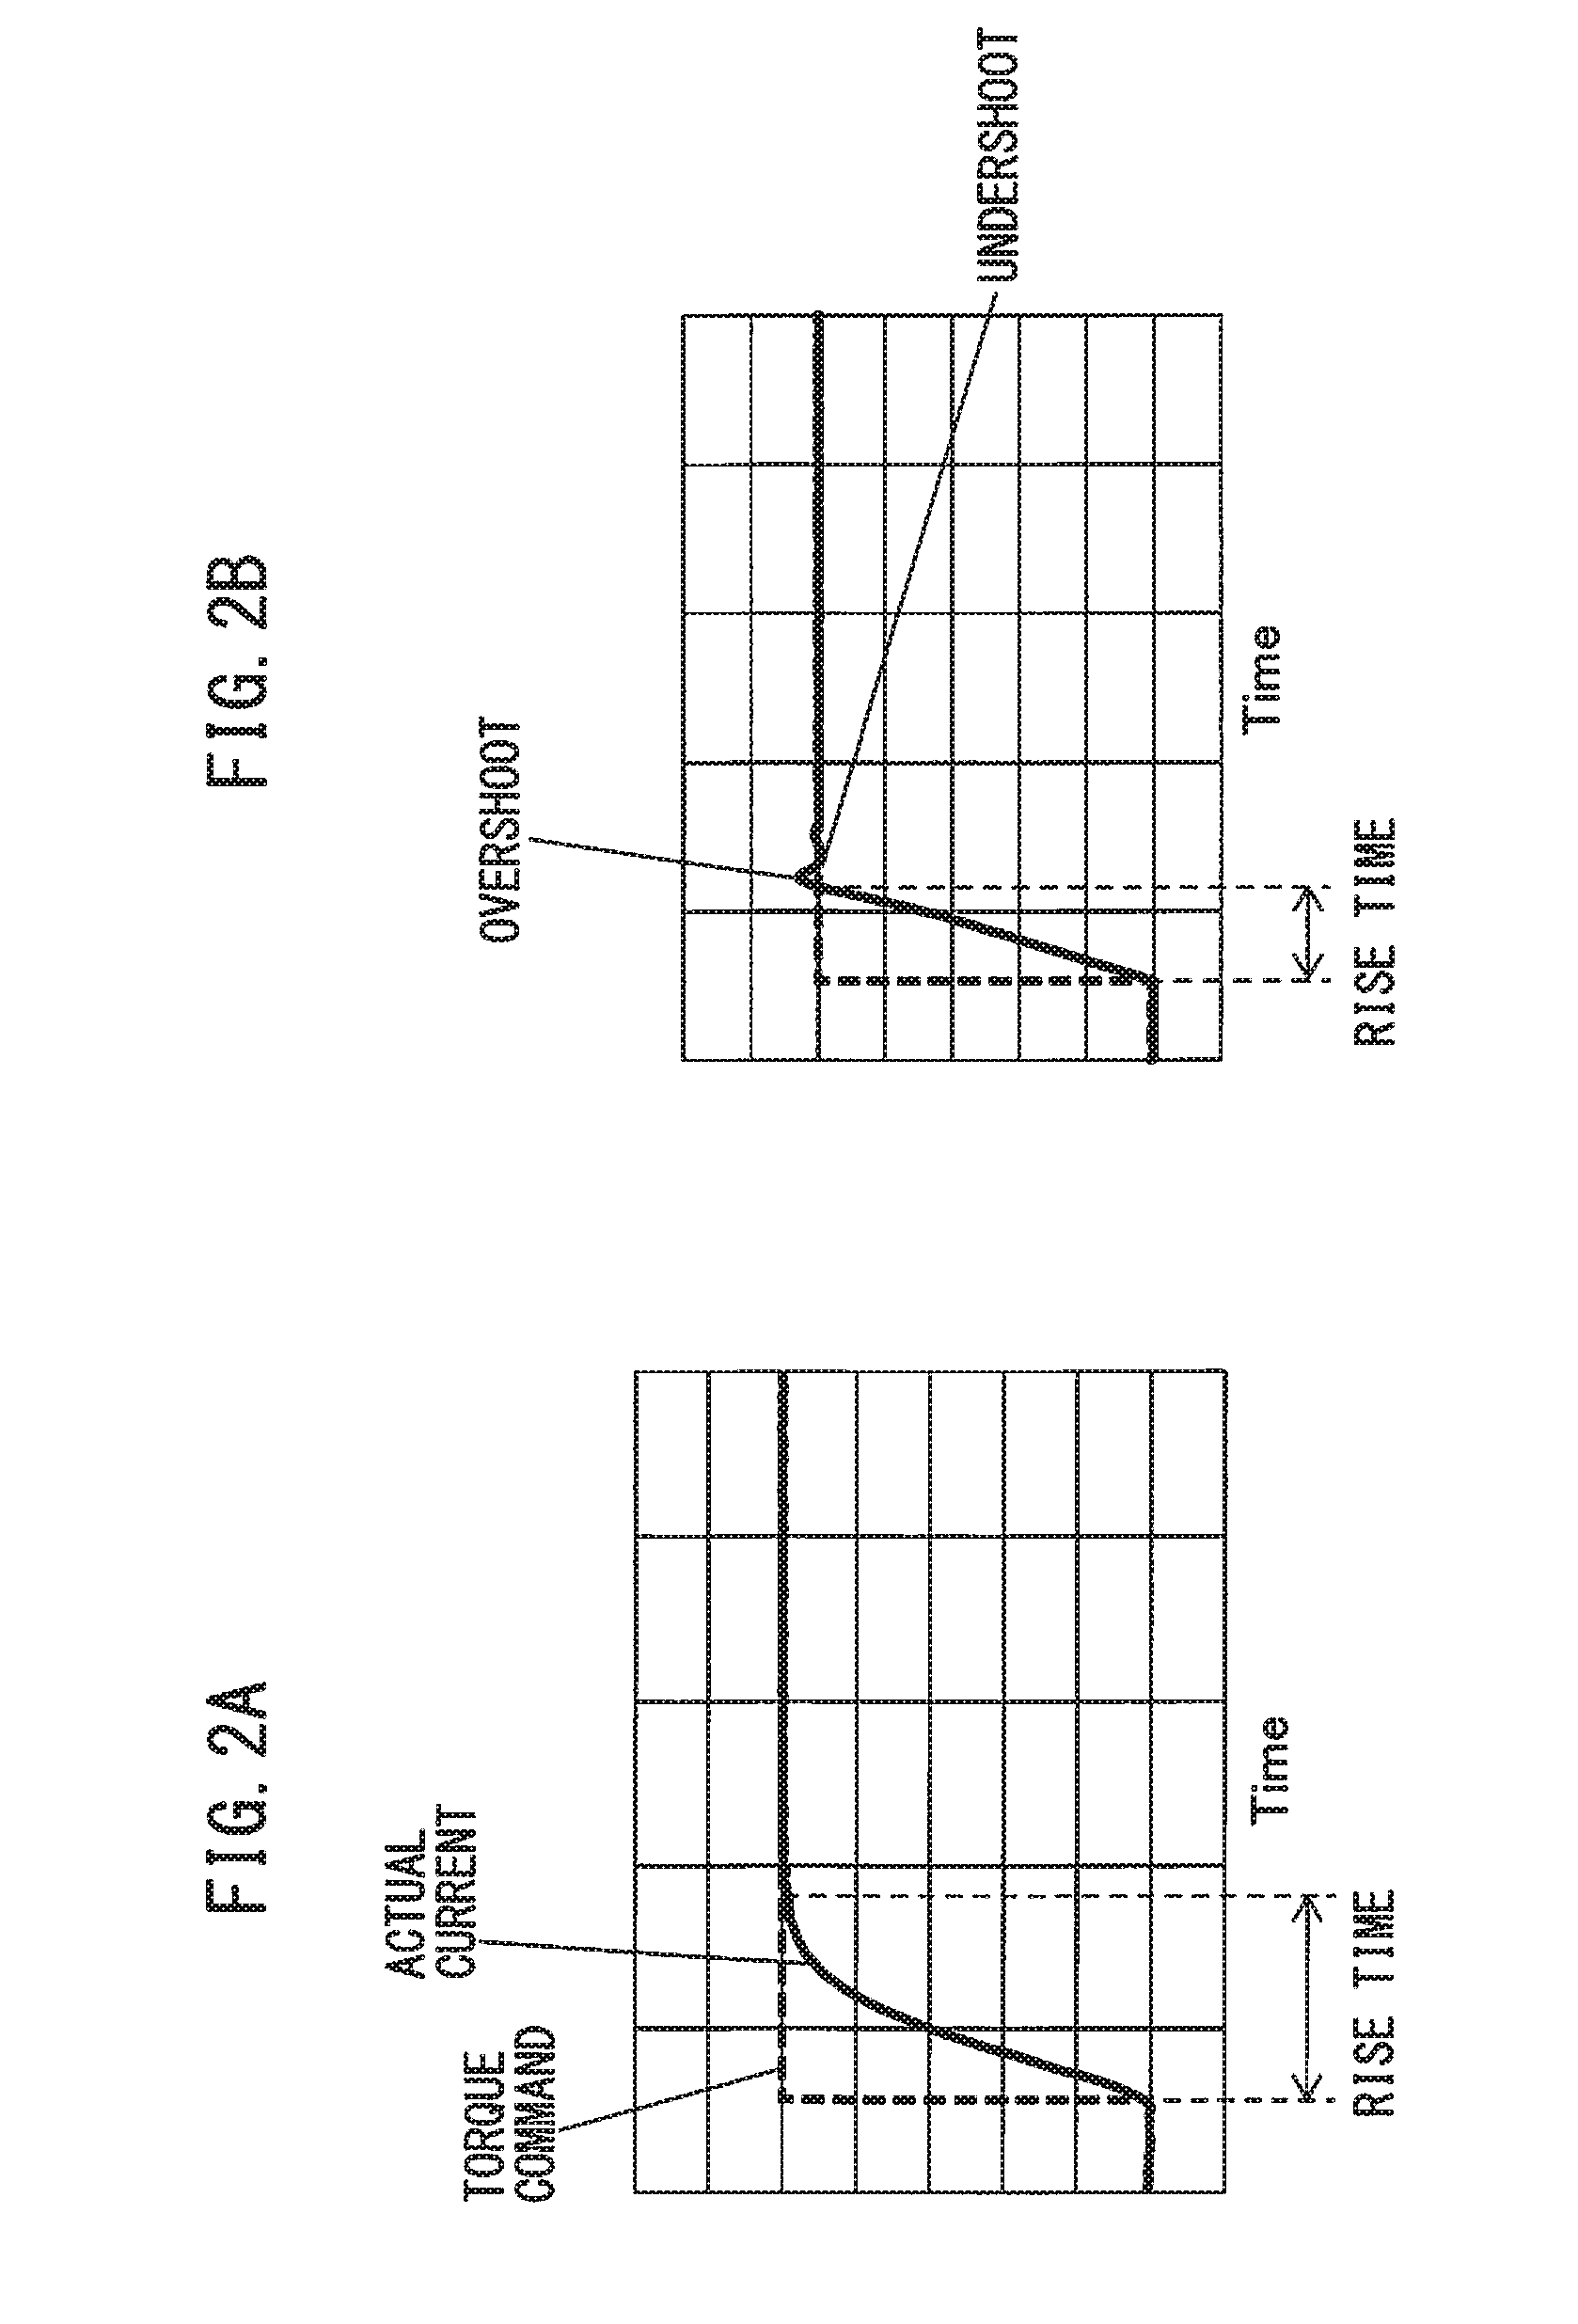 Machine learning apparatus for learning gain optimization, motor control apparatus equipped with machine learning apparatus, and machine learning method